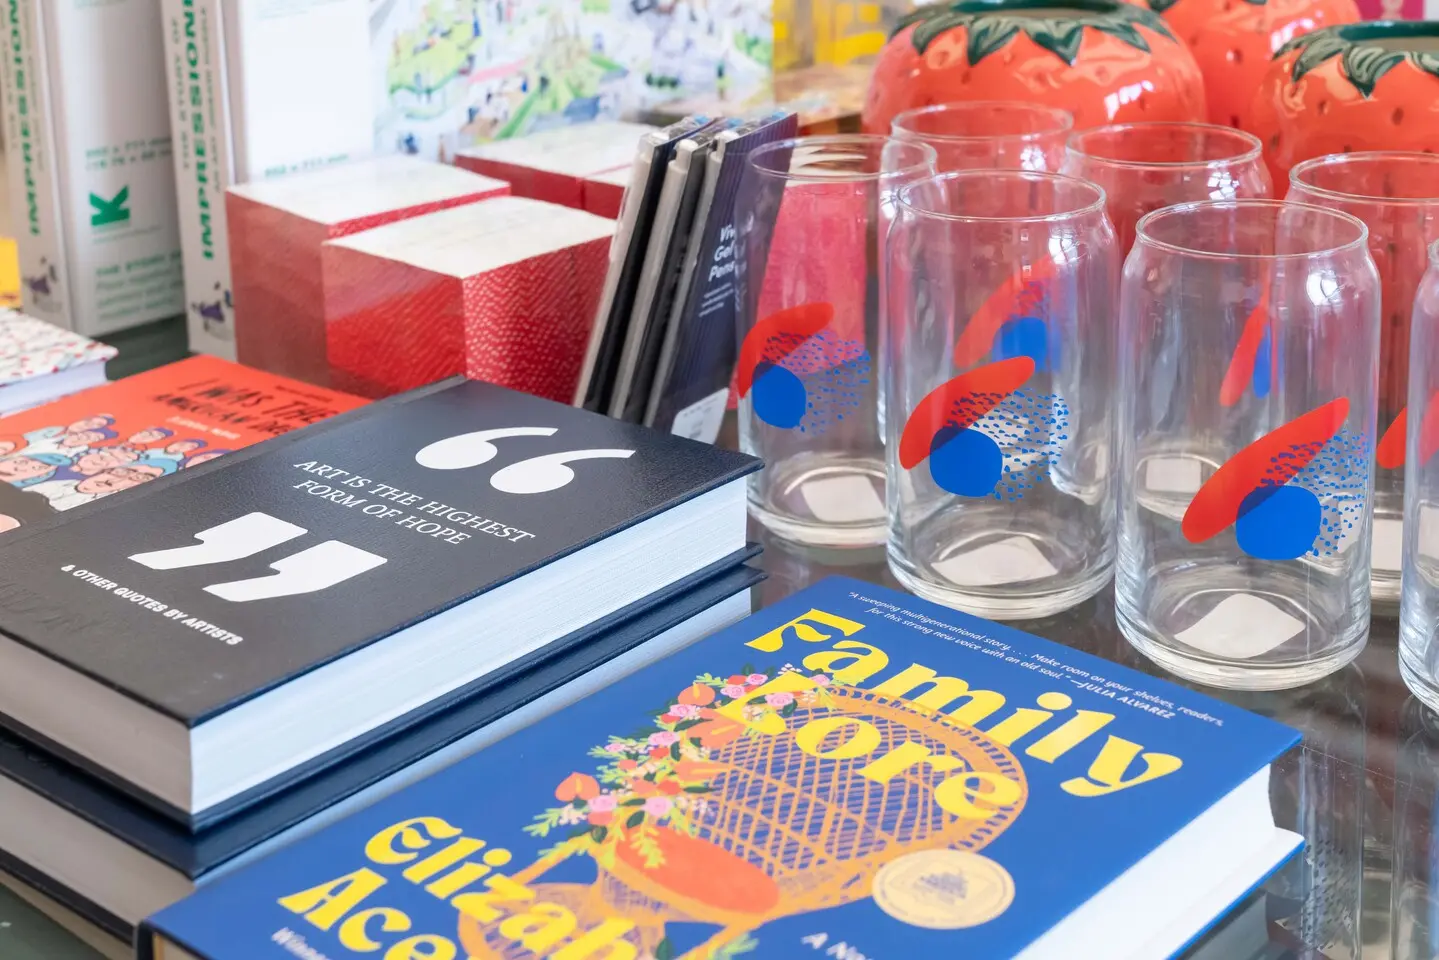 A close up of shop items, including glasses with colorful print and books such as "Family Lore" and "Art is the Highest Form of Hope."